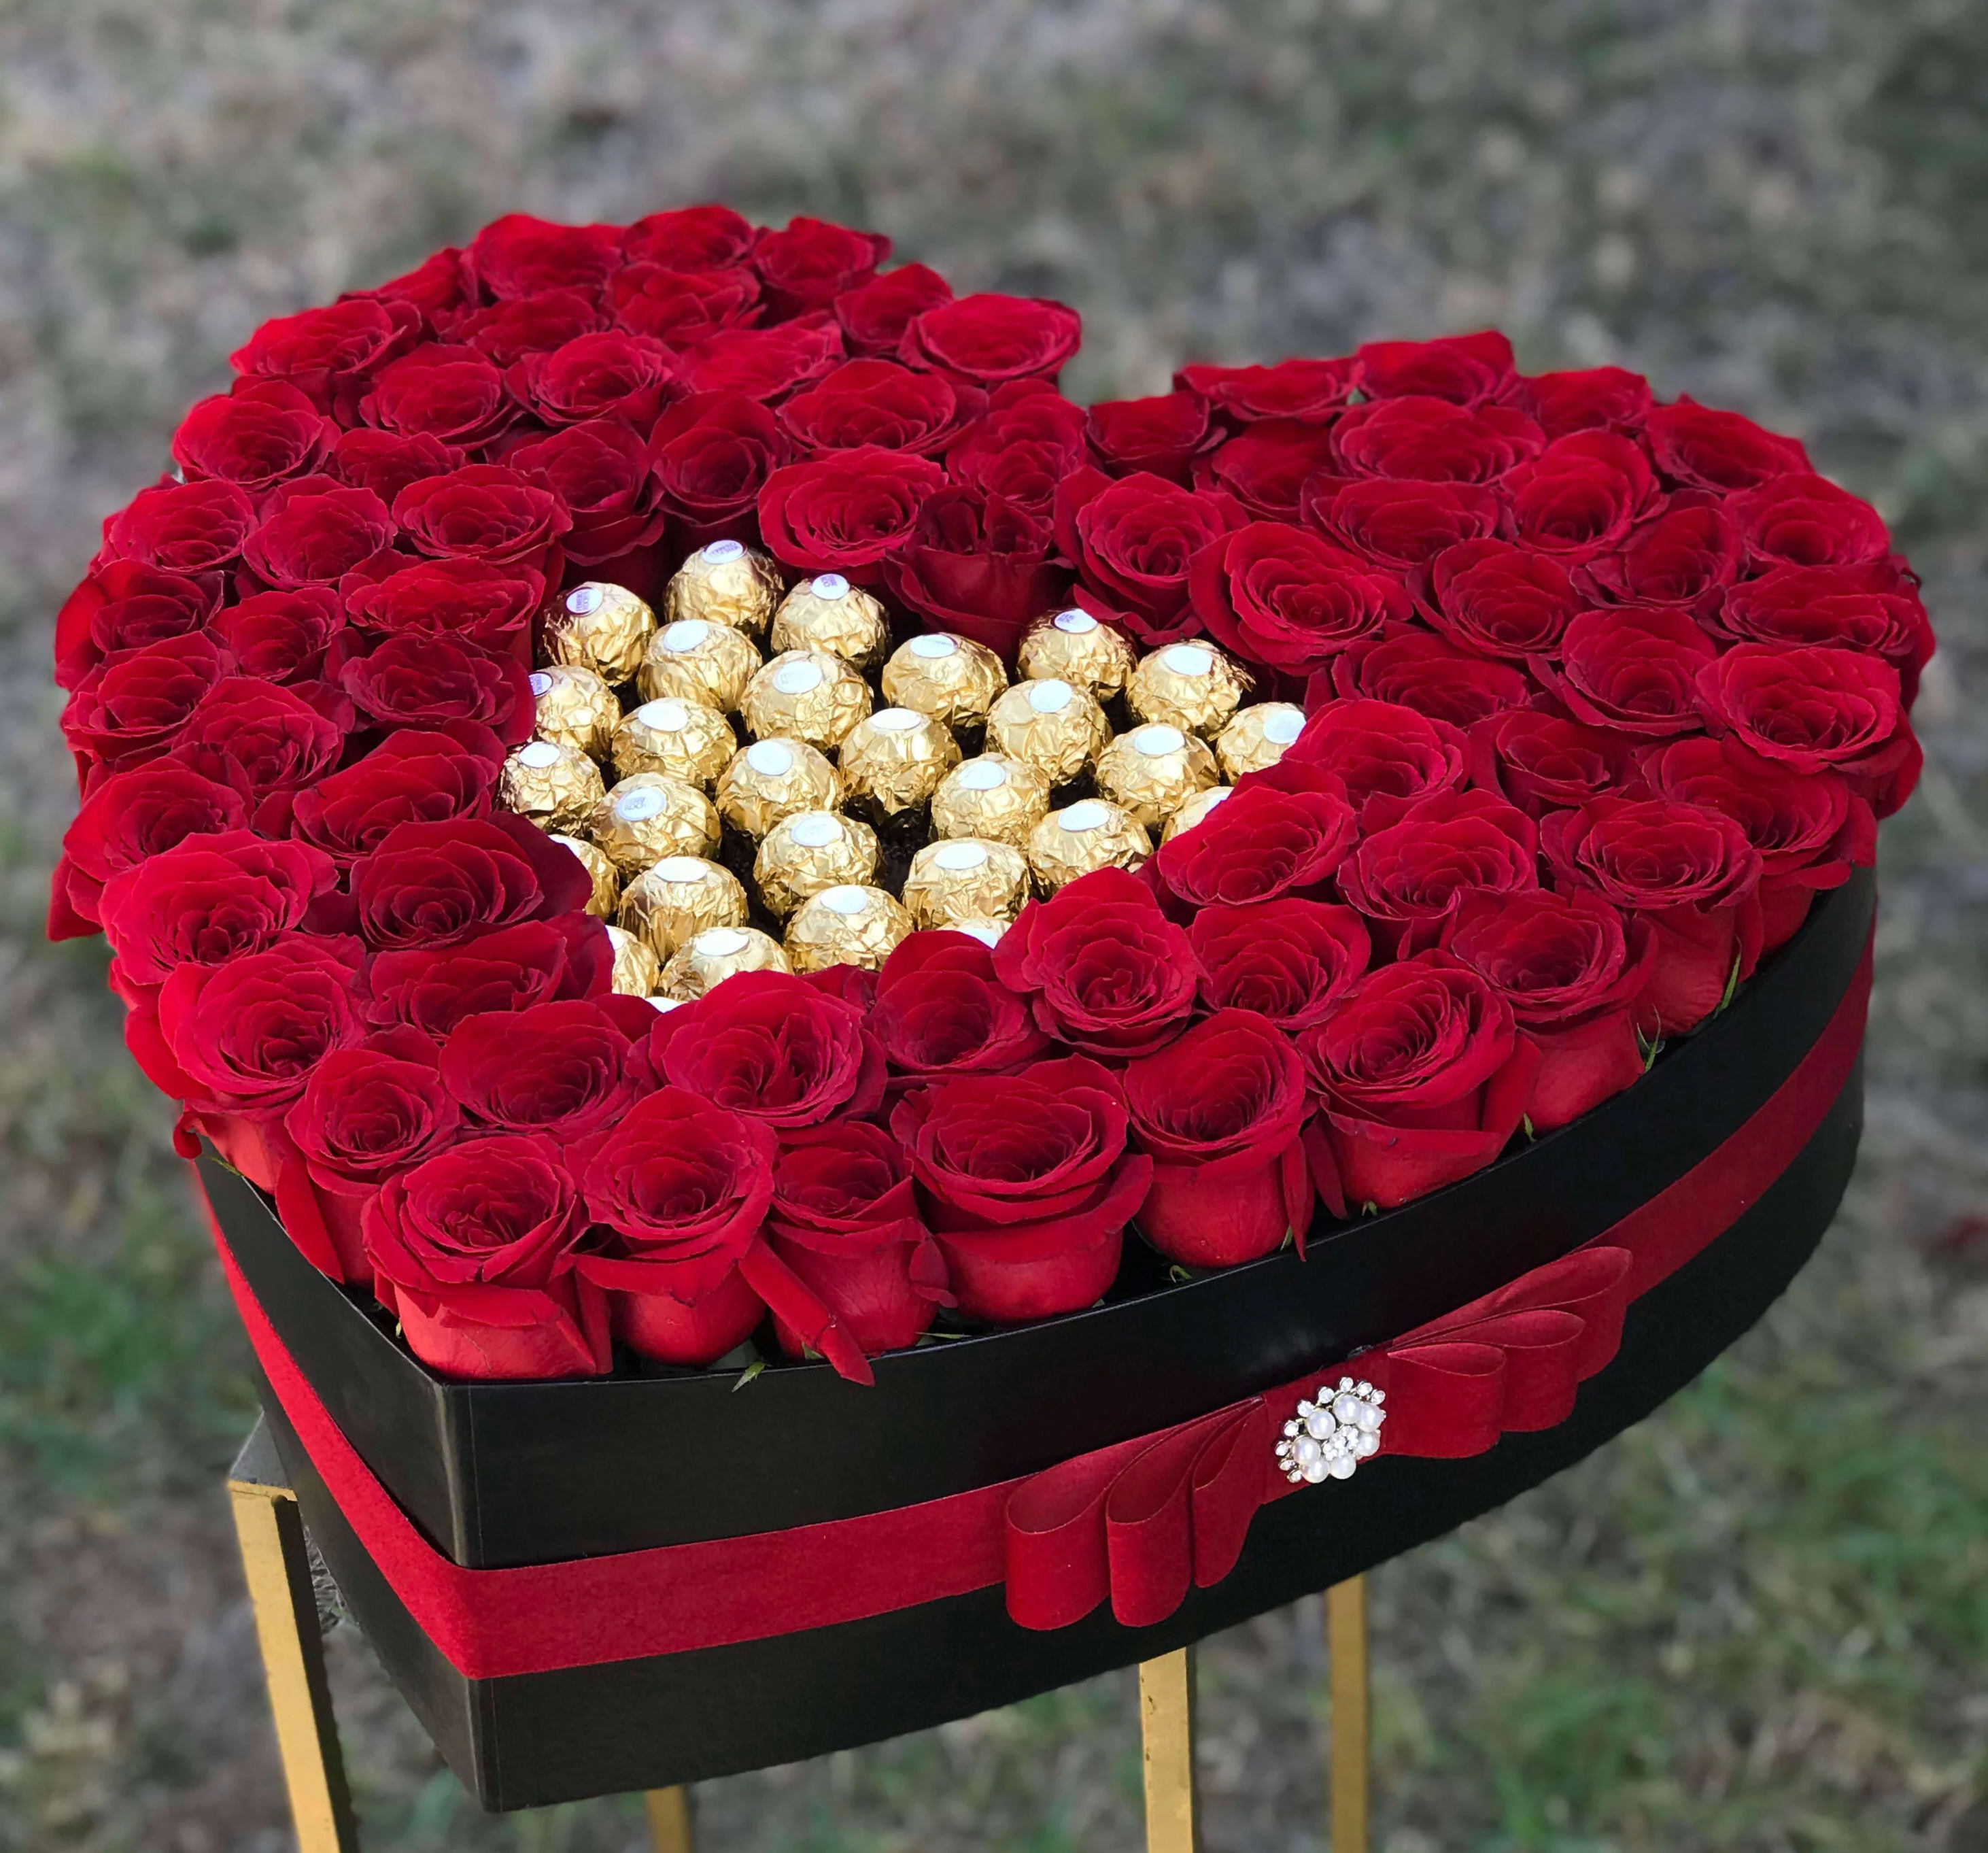 Roses and Ferrero Rocher in Glendale, CA | Boxed Flowers and Sweets